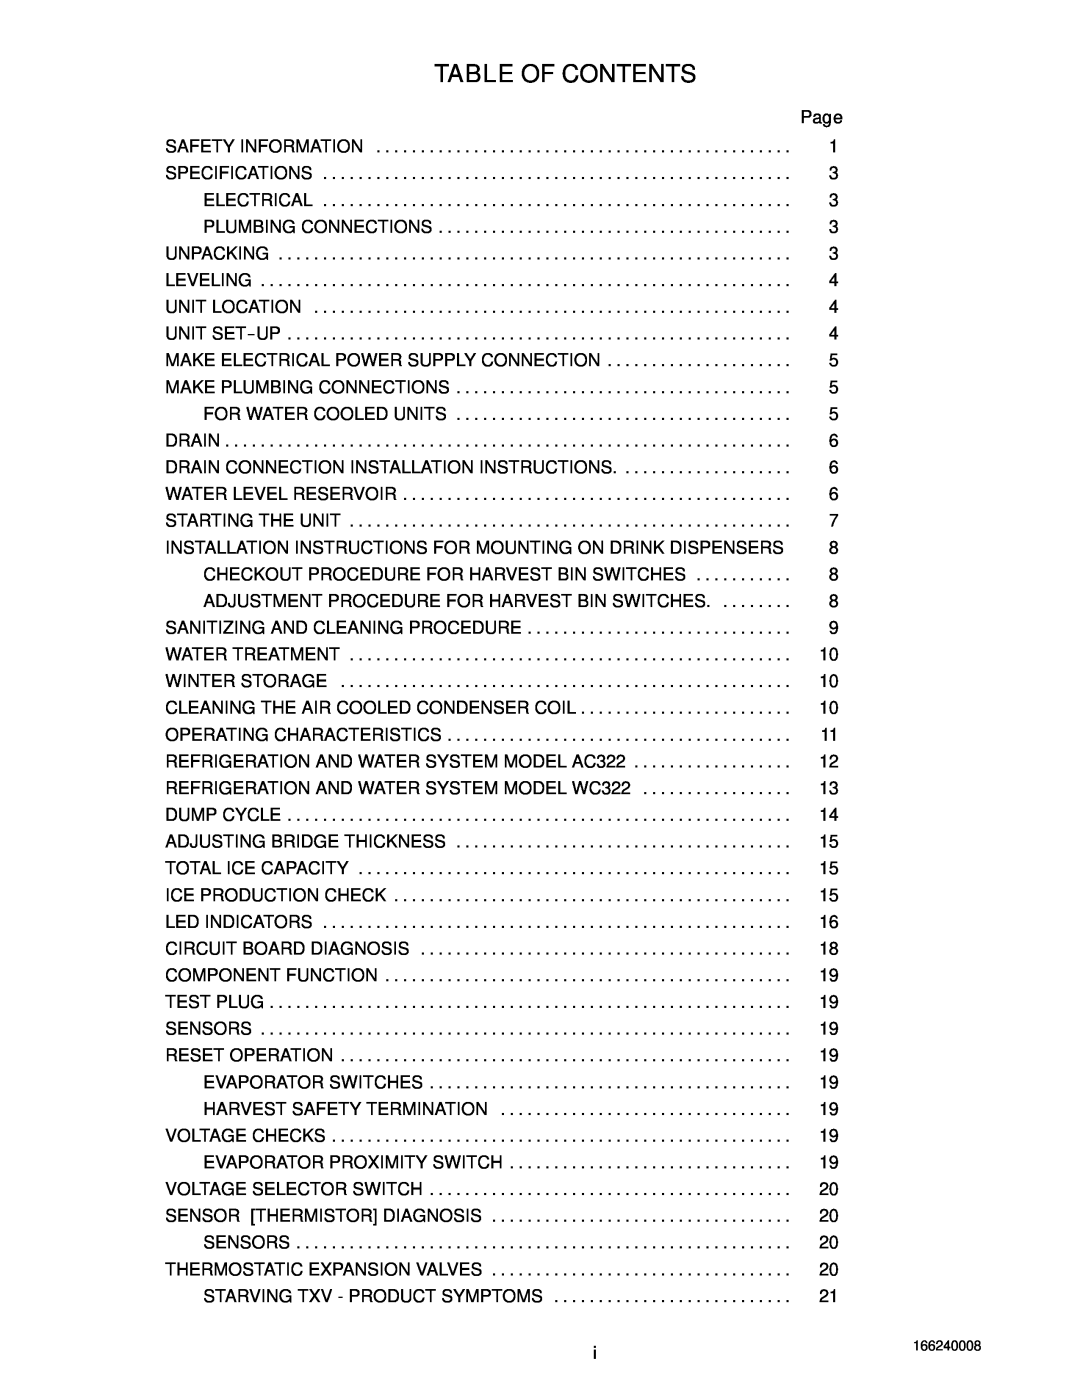 Cornelius 322 Table Of Contents, Installation Instructions For Mounting On Drink Dispensers, Harvest Safety Termination 